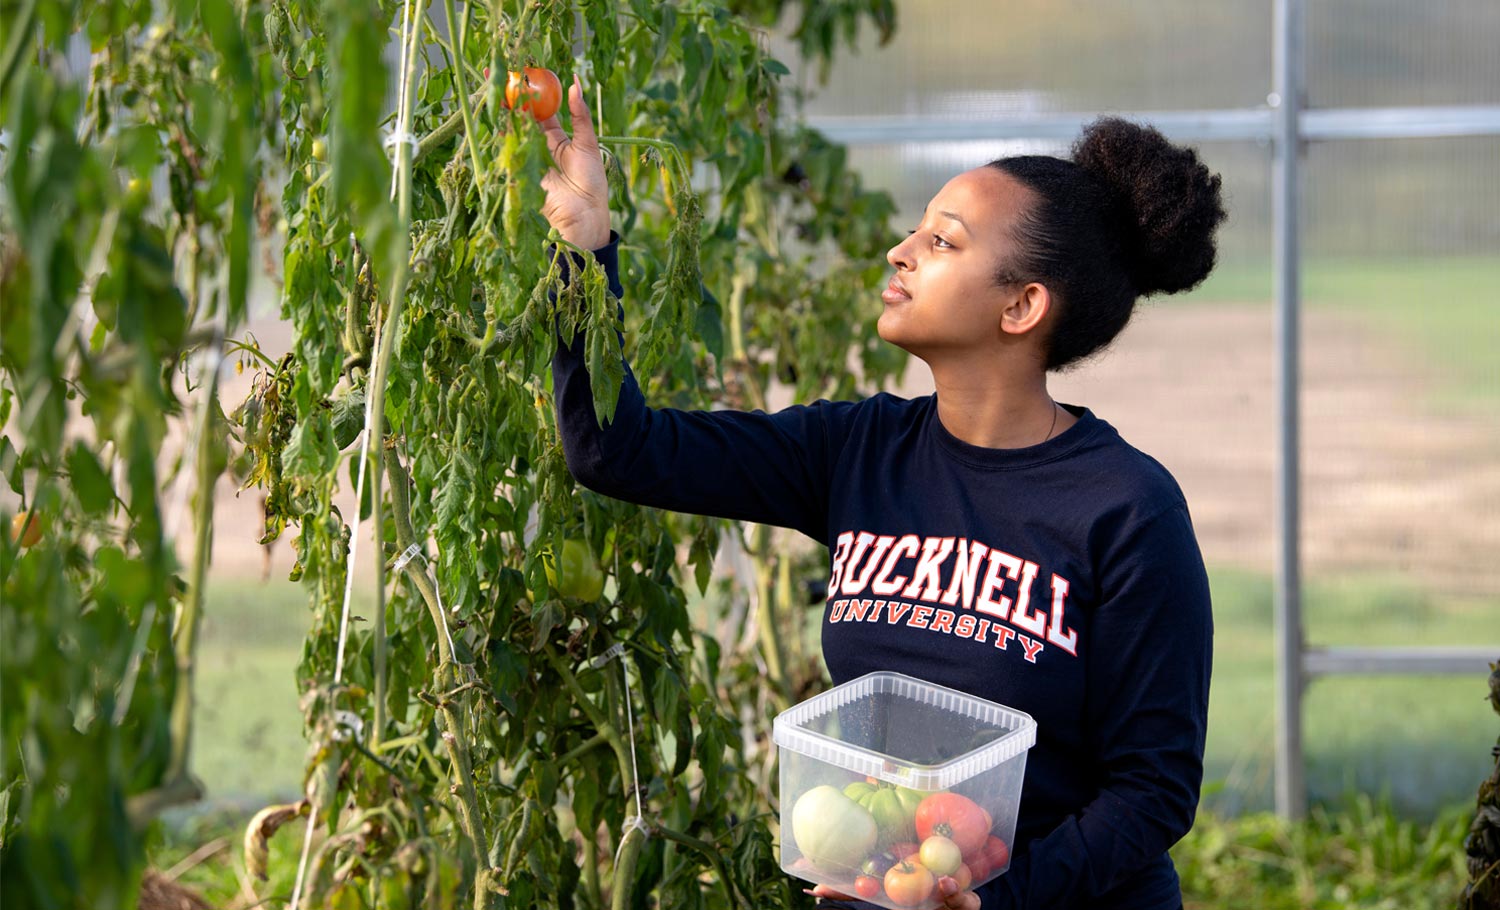 student Bitseat Getaneh picks a tomato from a vine